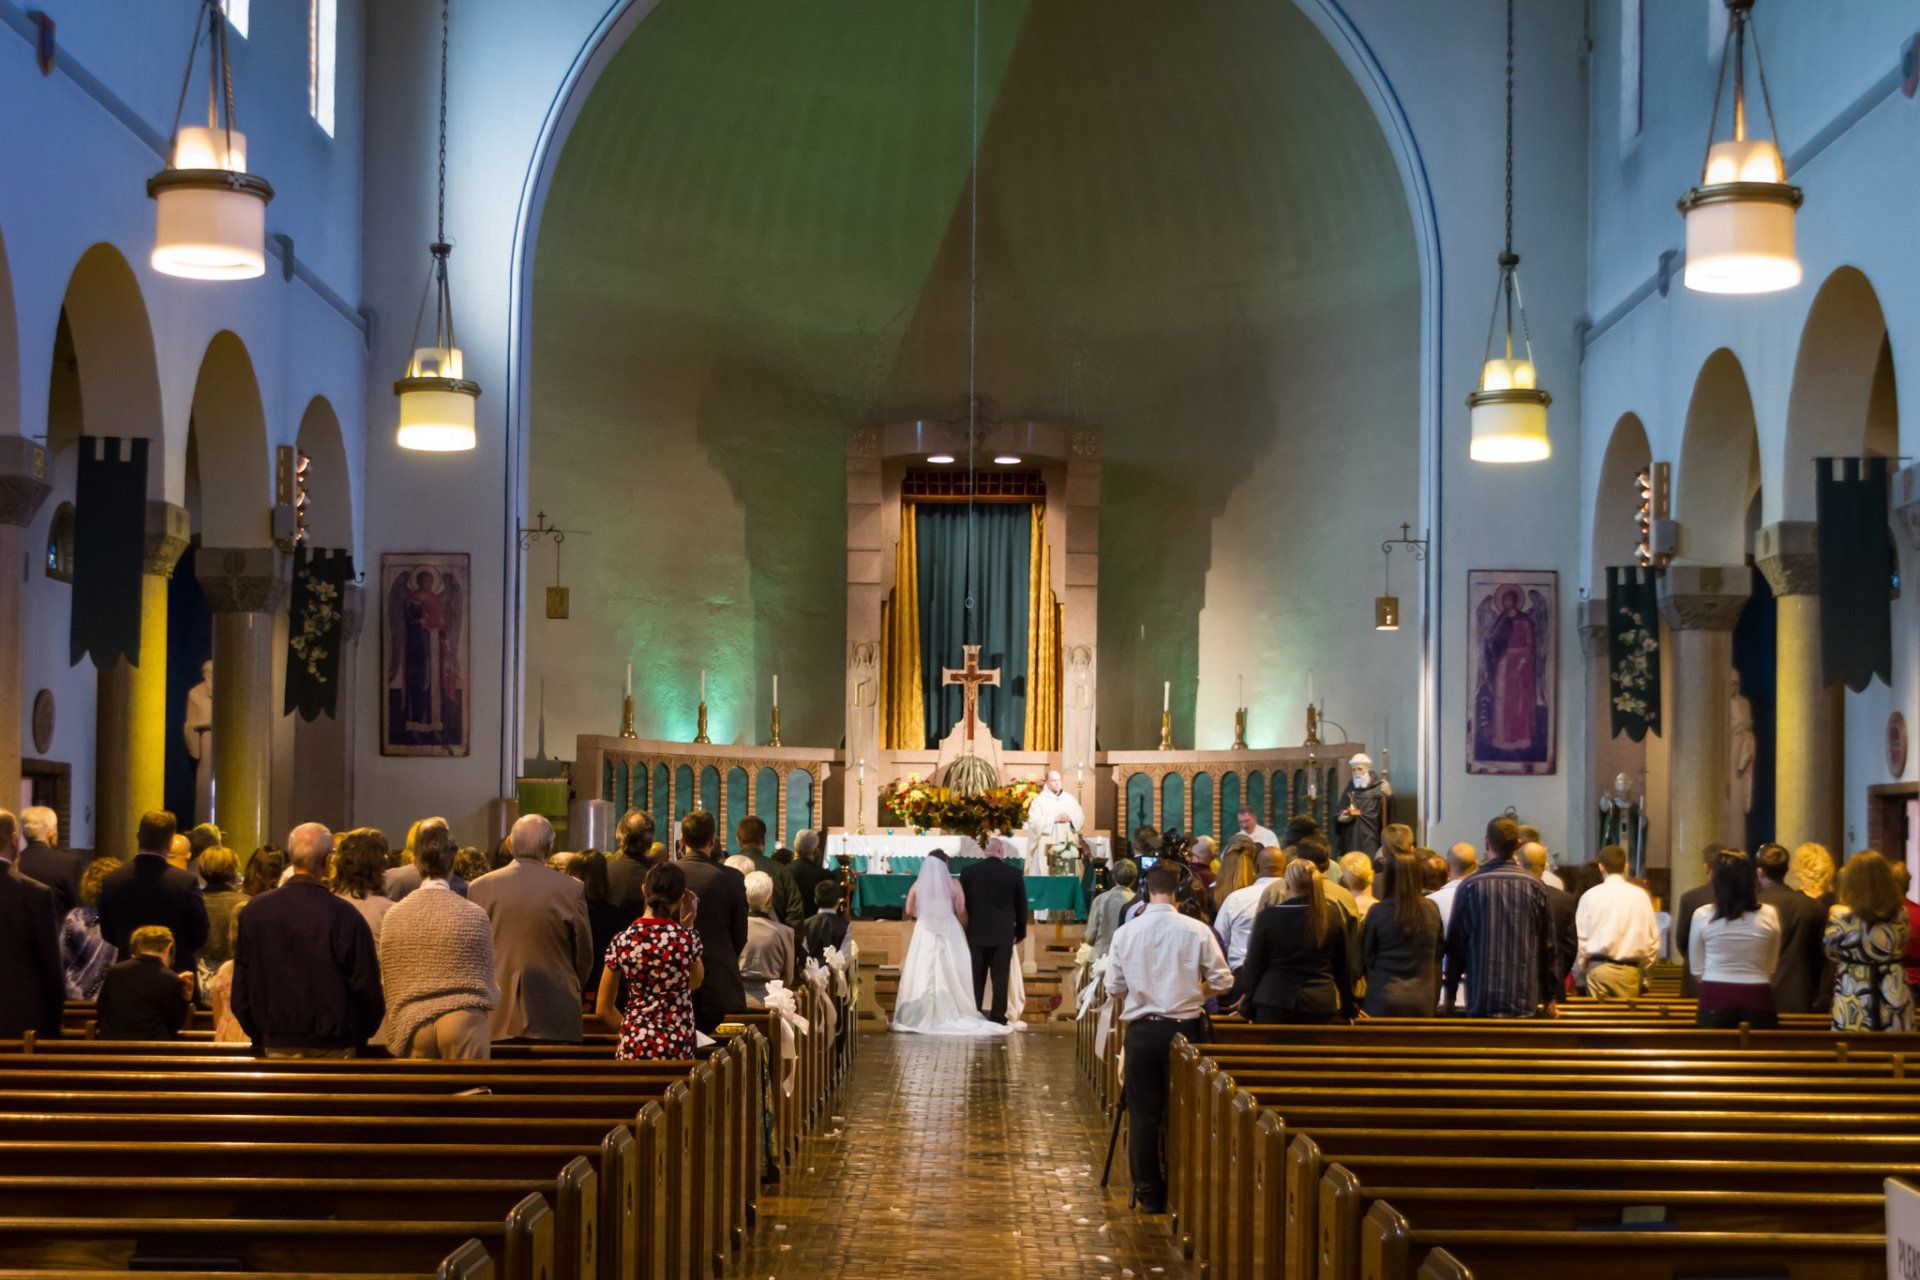 A view from the back of the church of the aisle, the bride and groom at the alter and the church in the background